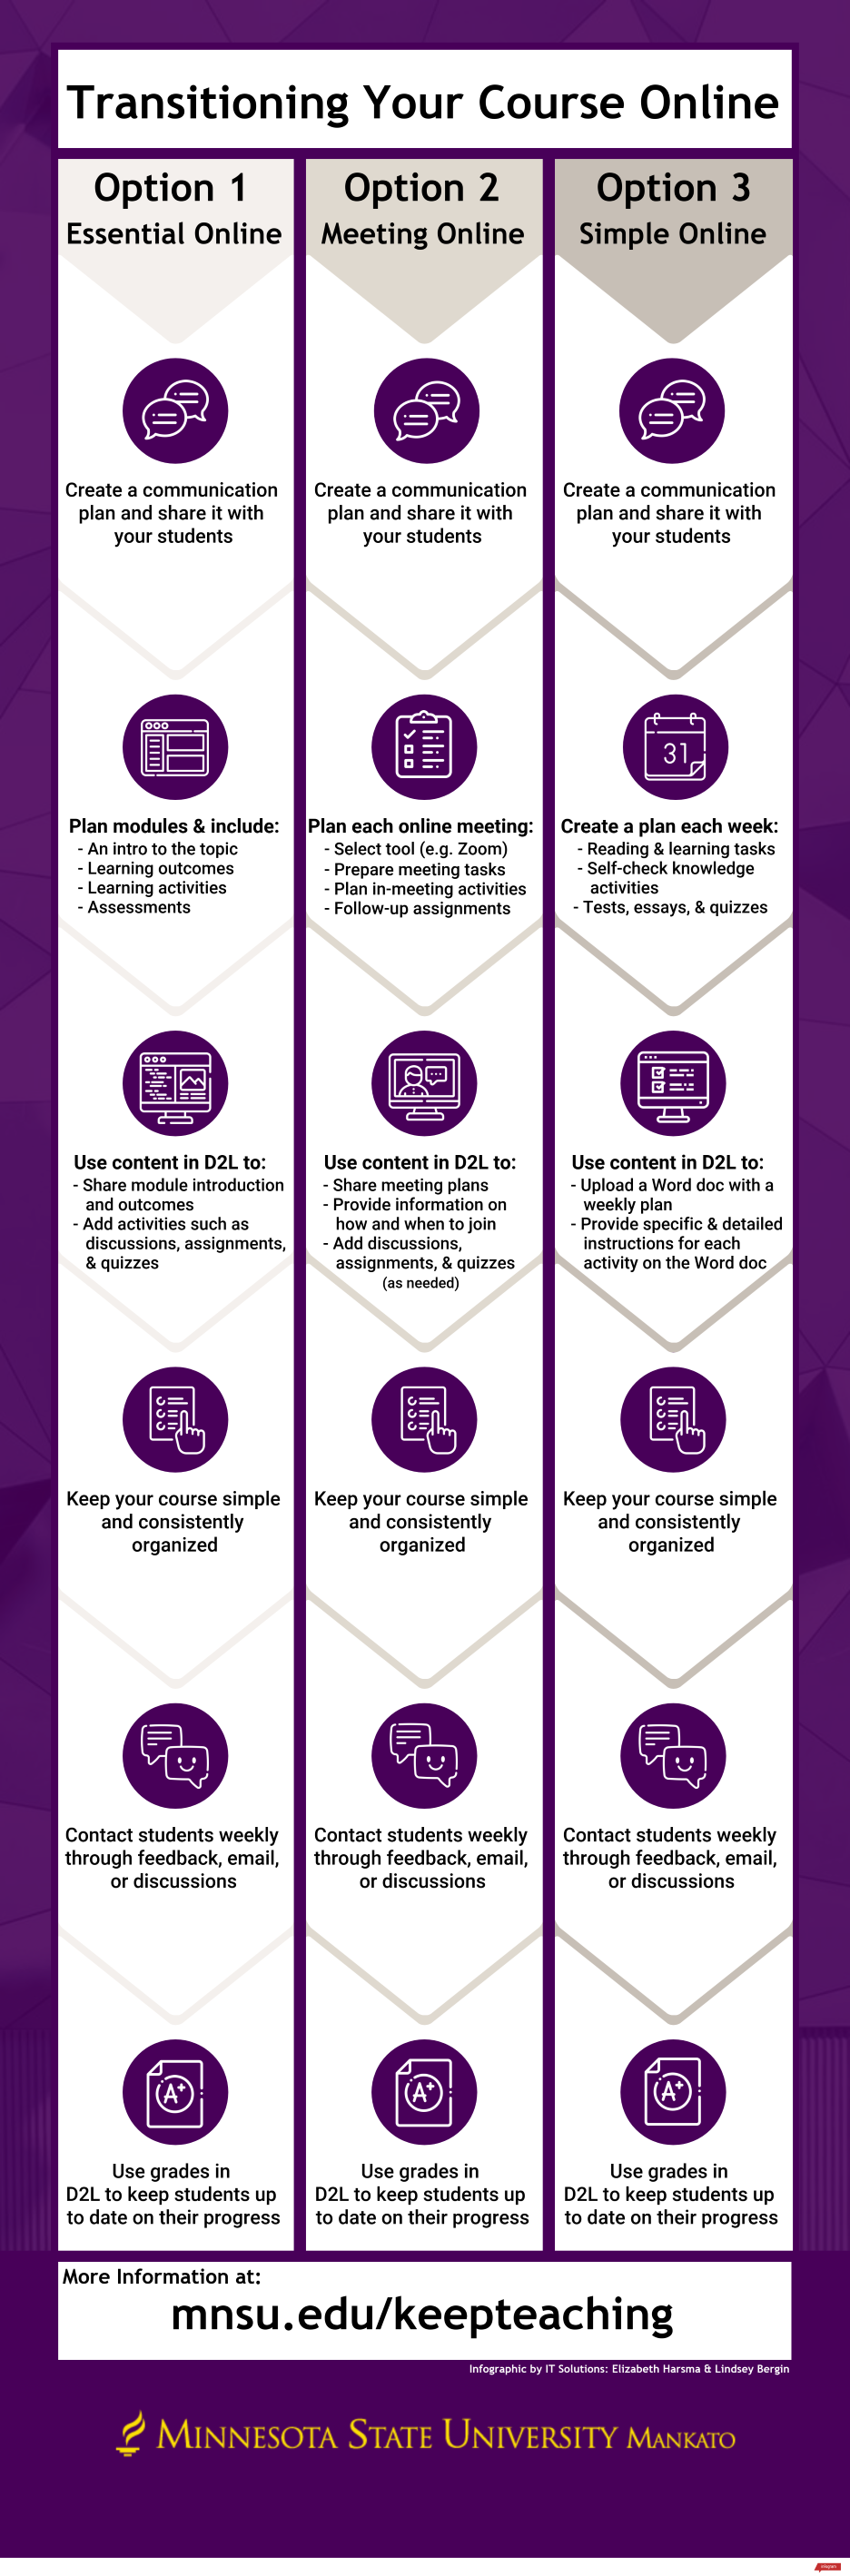 Three Simple Options for Transitioning Online infographic by mnsu.edu/keepteaching